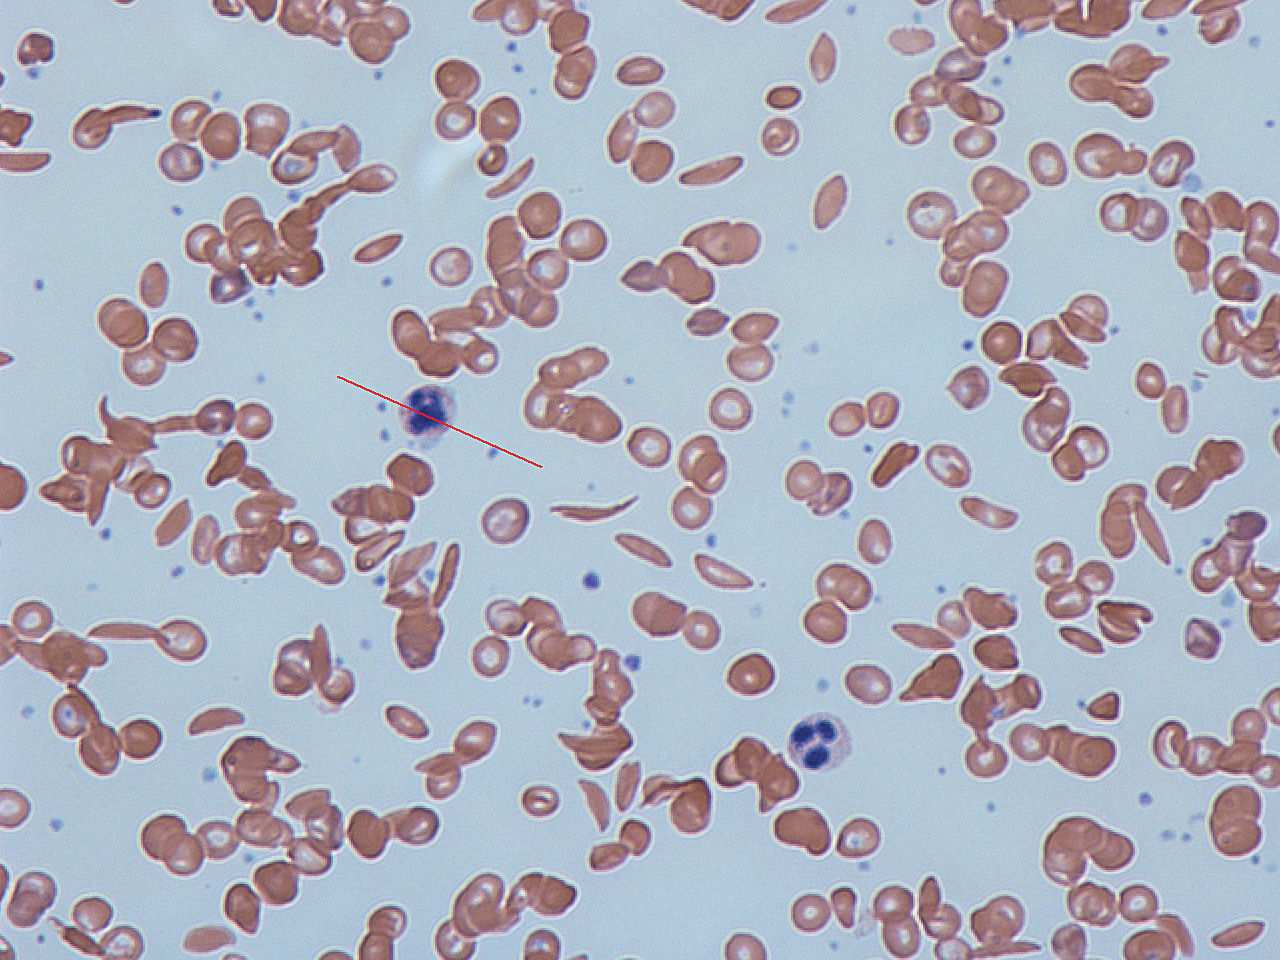 Photo. Sickle-cell disease is a genetic blood disorder characterized by red blood cells that assume an abnormal, rigid, sickle shape